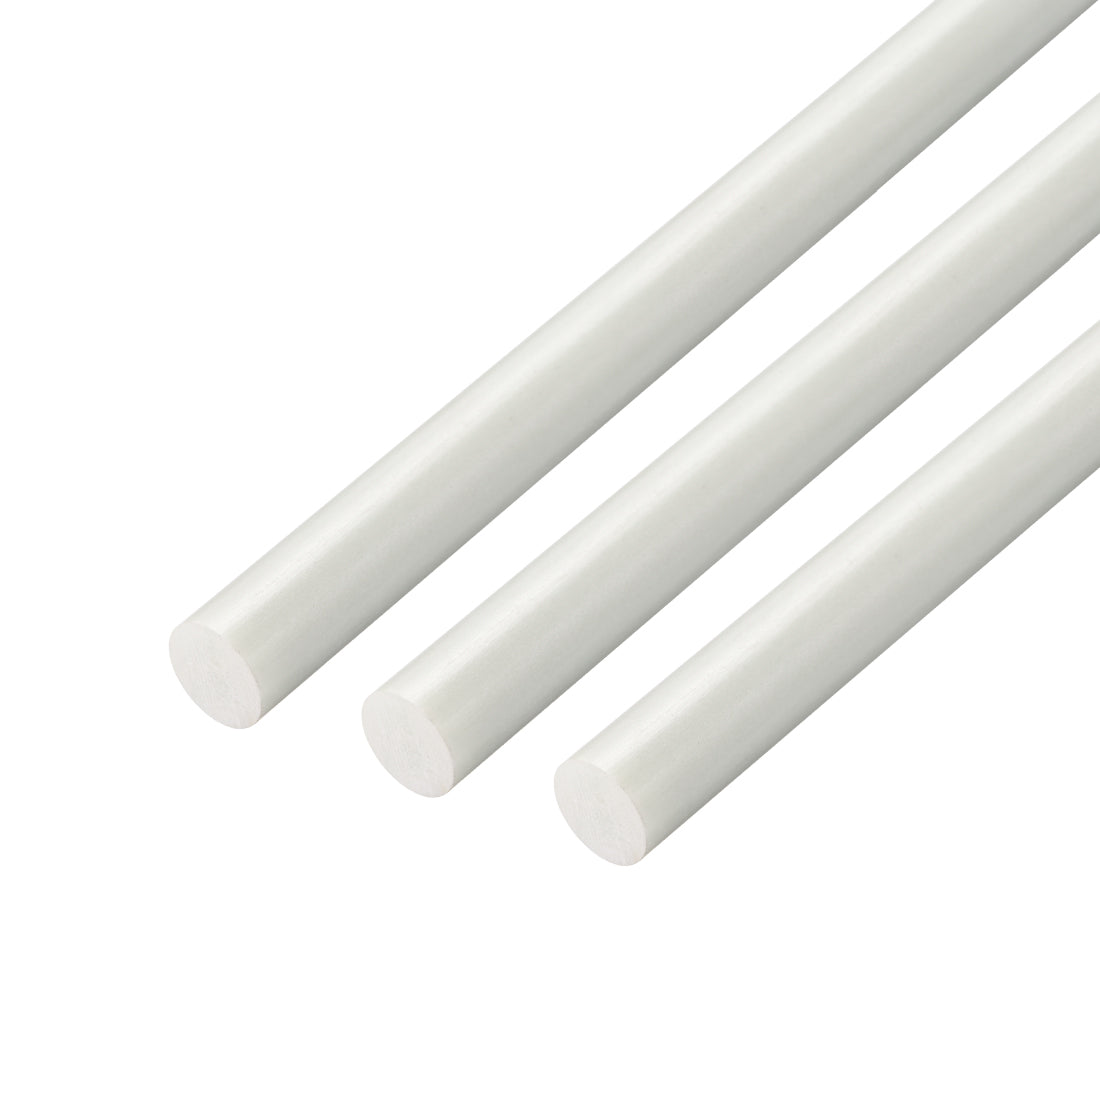 uxcell Uxcell FRP Fiberglass Round Rod,7mm Dia 50cm Long,White Engineering Round Bars 3pcs